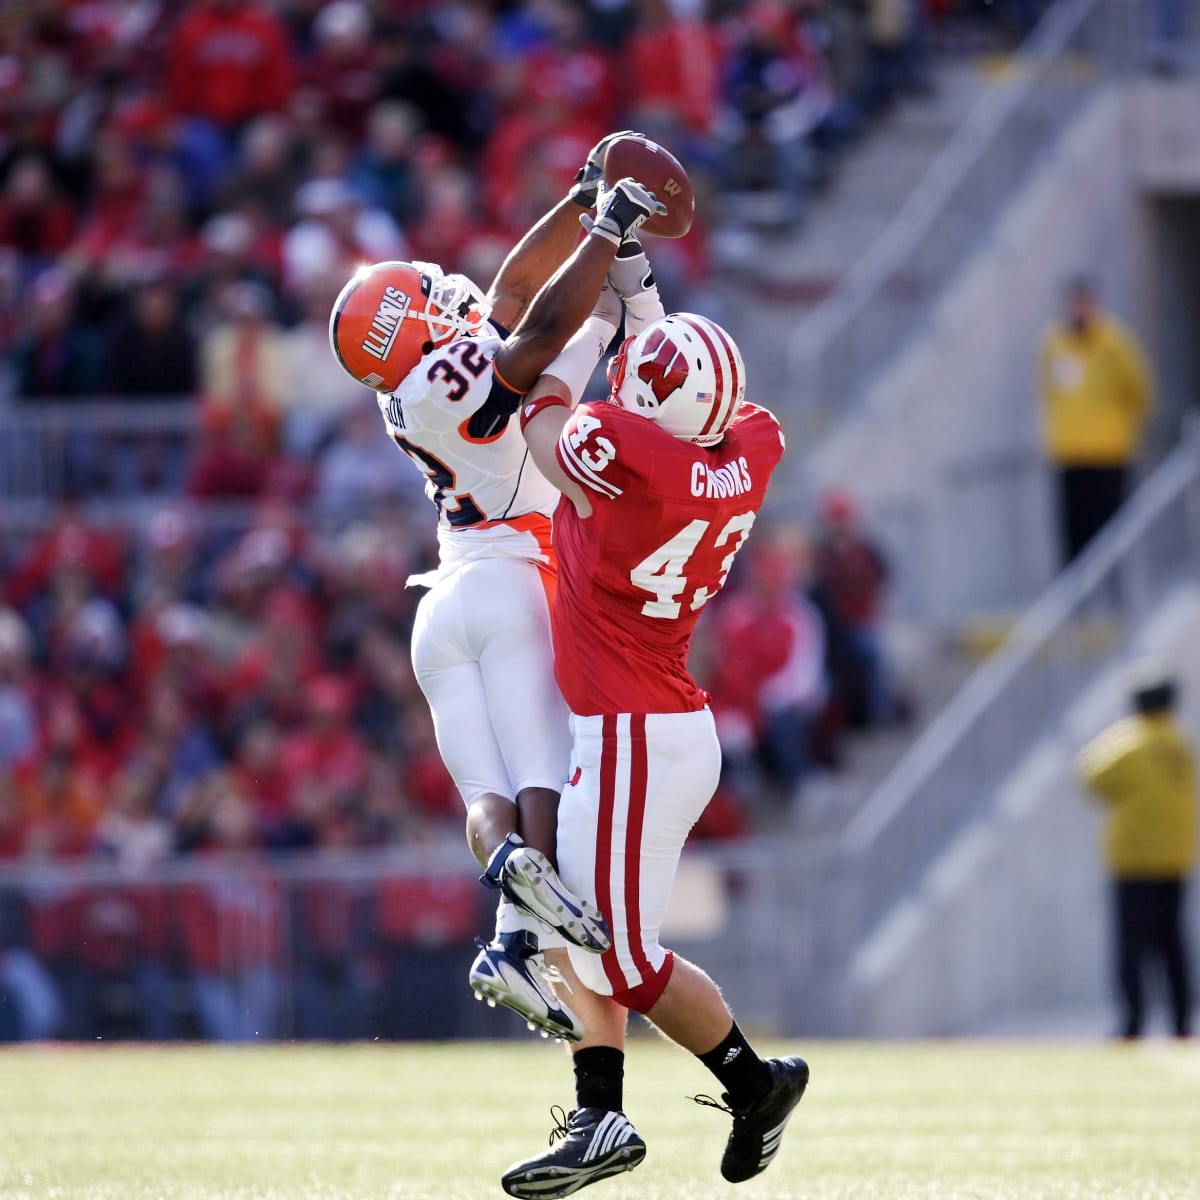 Wisconsin Badgers 2021 football opponent preview: Illinois Fighting Illini  - Bucky's 5th Quarter